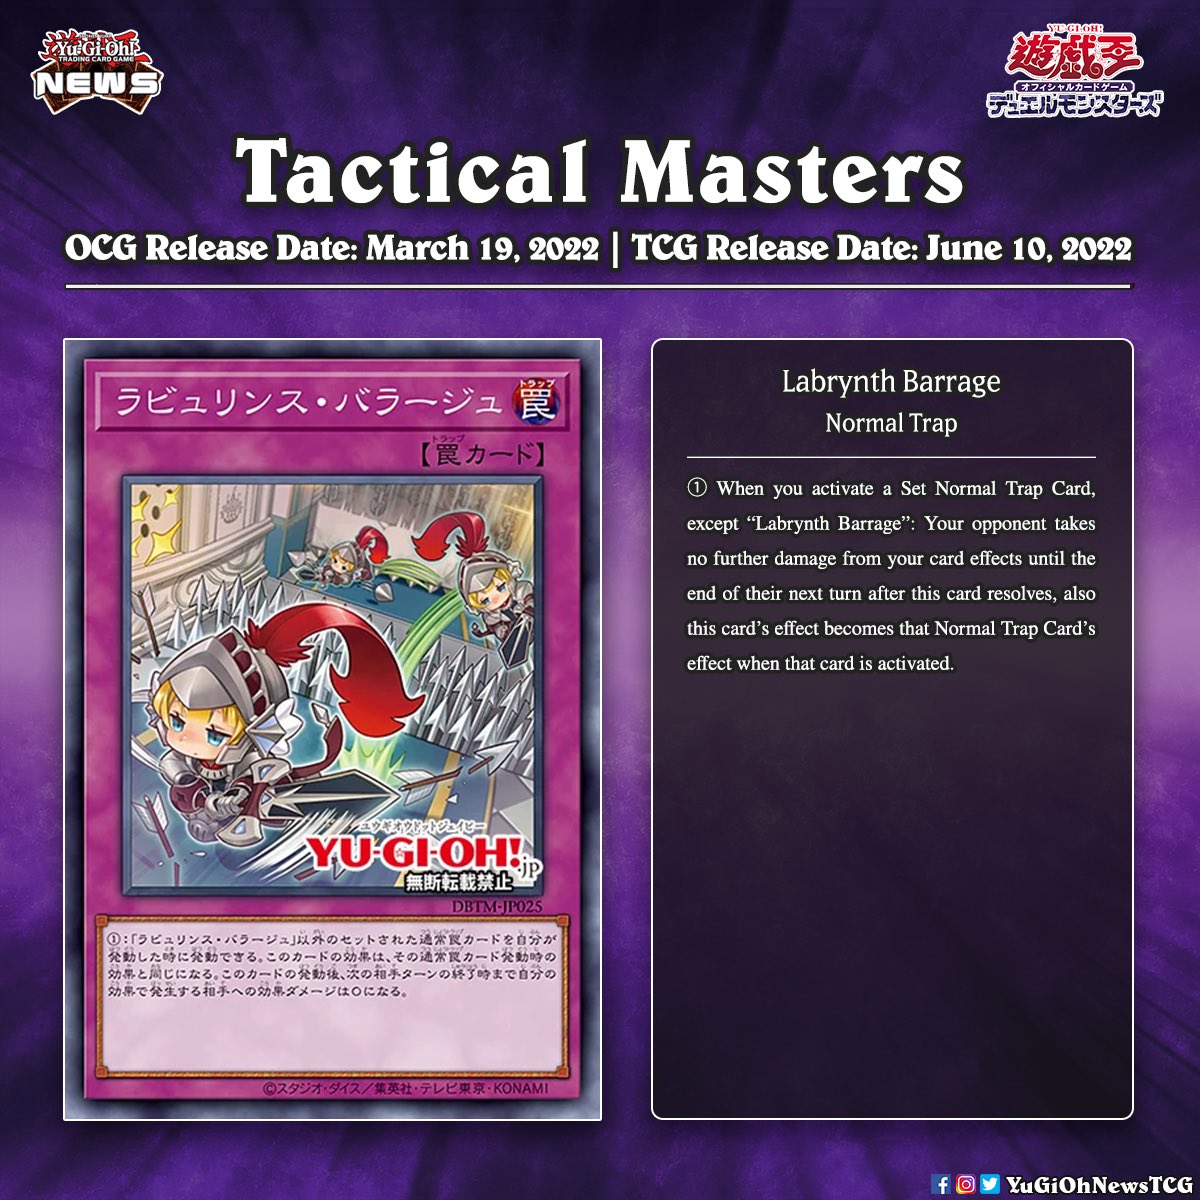 Yugioh News 𝗧𝗮𝗰𝘁𝗶𝗰𝗮𝗹 𝗠𝗮𝘀𝘁𝗲𝗿𝘀 The Third And Final Archetype From The Upcoming Set Tactical Masters Has Been Revealed Translation Ygorganization 遊戯王 Yugioh 유희왕 T Co Qw1e9bpi5v Twitter